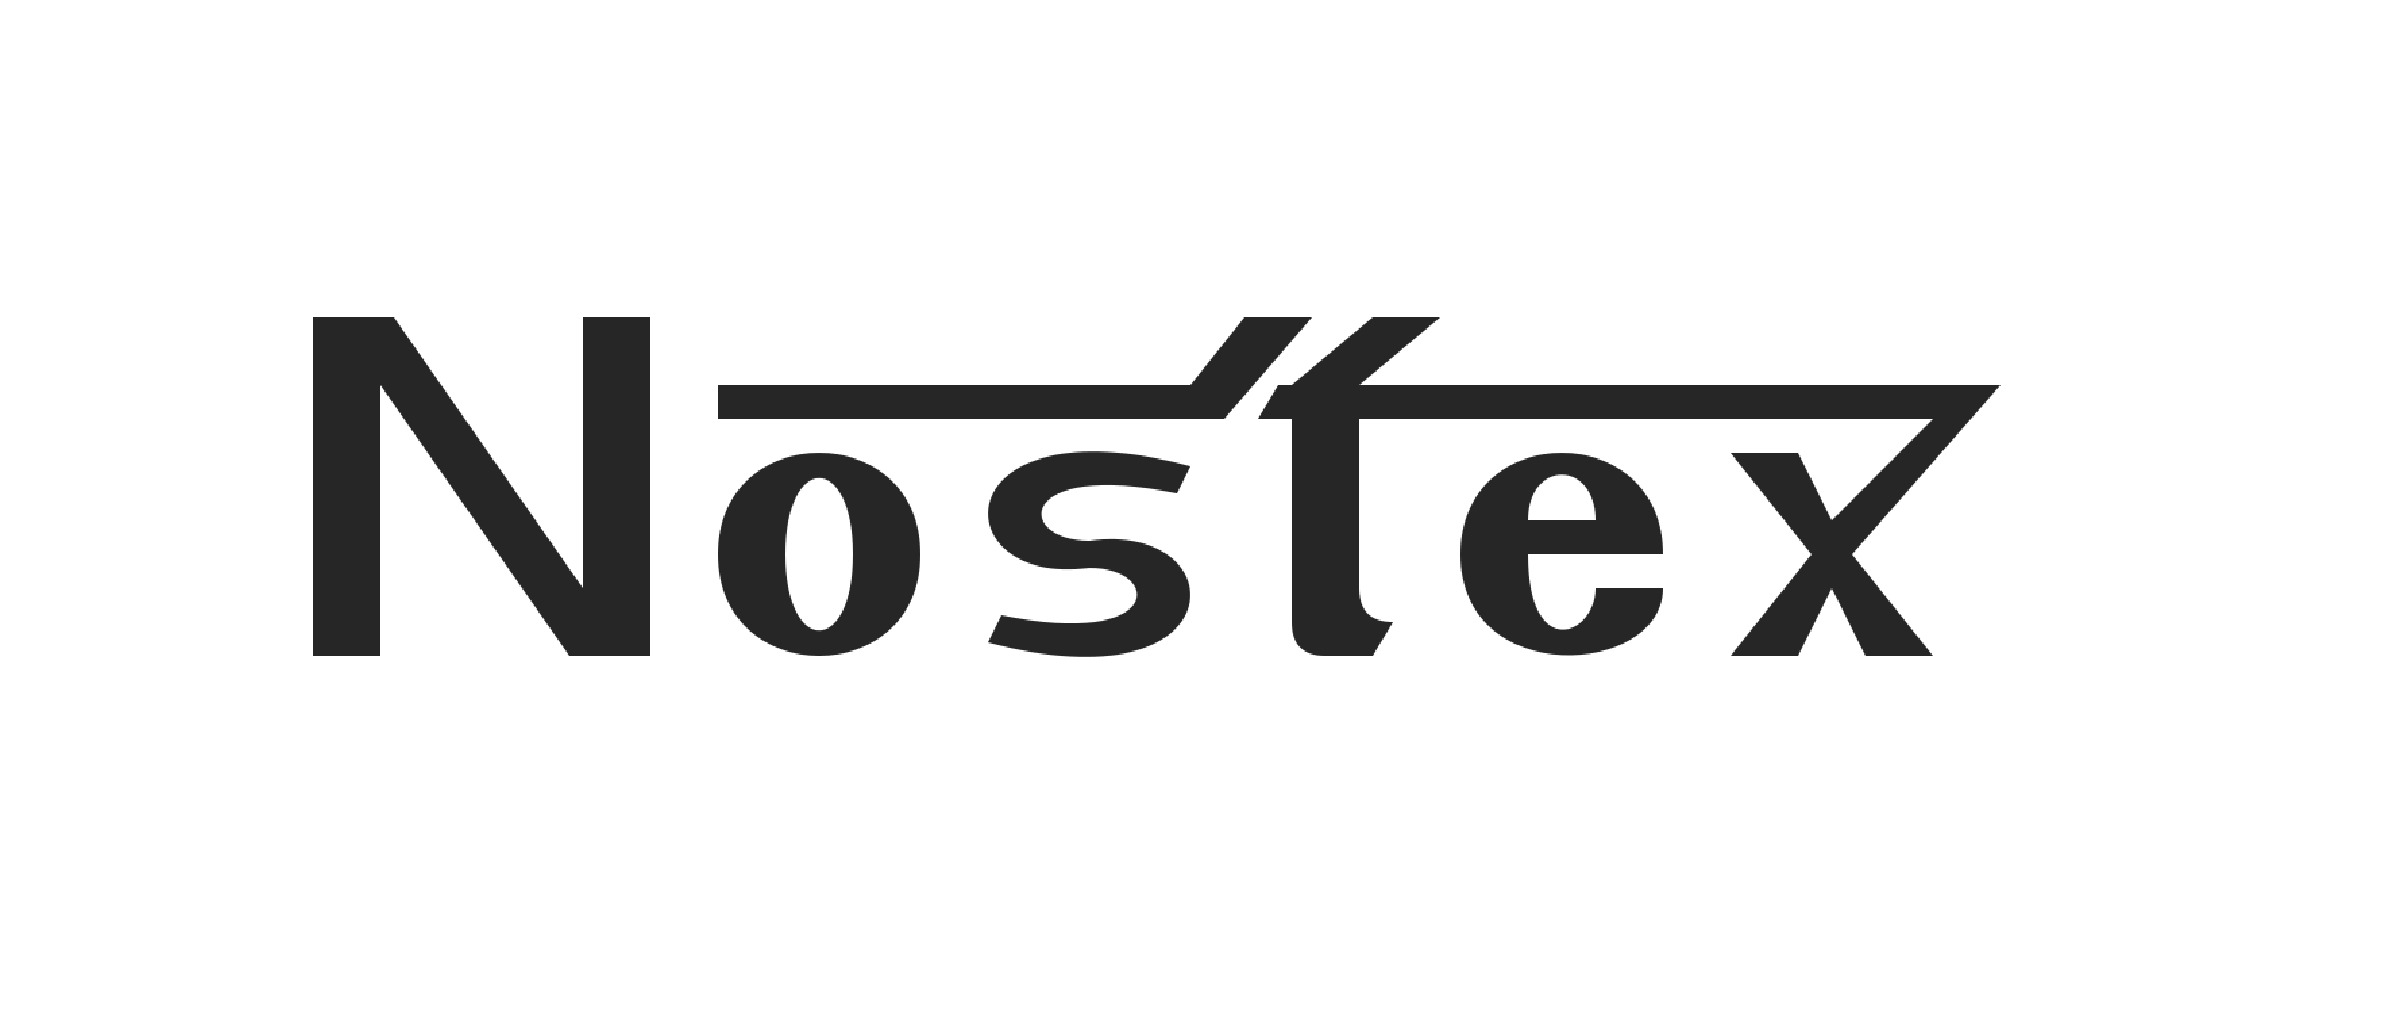 Logo reads Nostex in bold black type on a white background, a horizontal black line sits above the letters o s t e x and joins the t in the middle, with two small vertically slanted lines slightly gaped, and the x at the end of the word.  